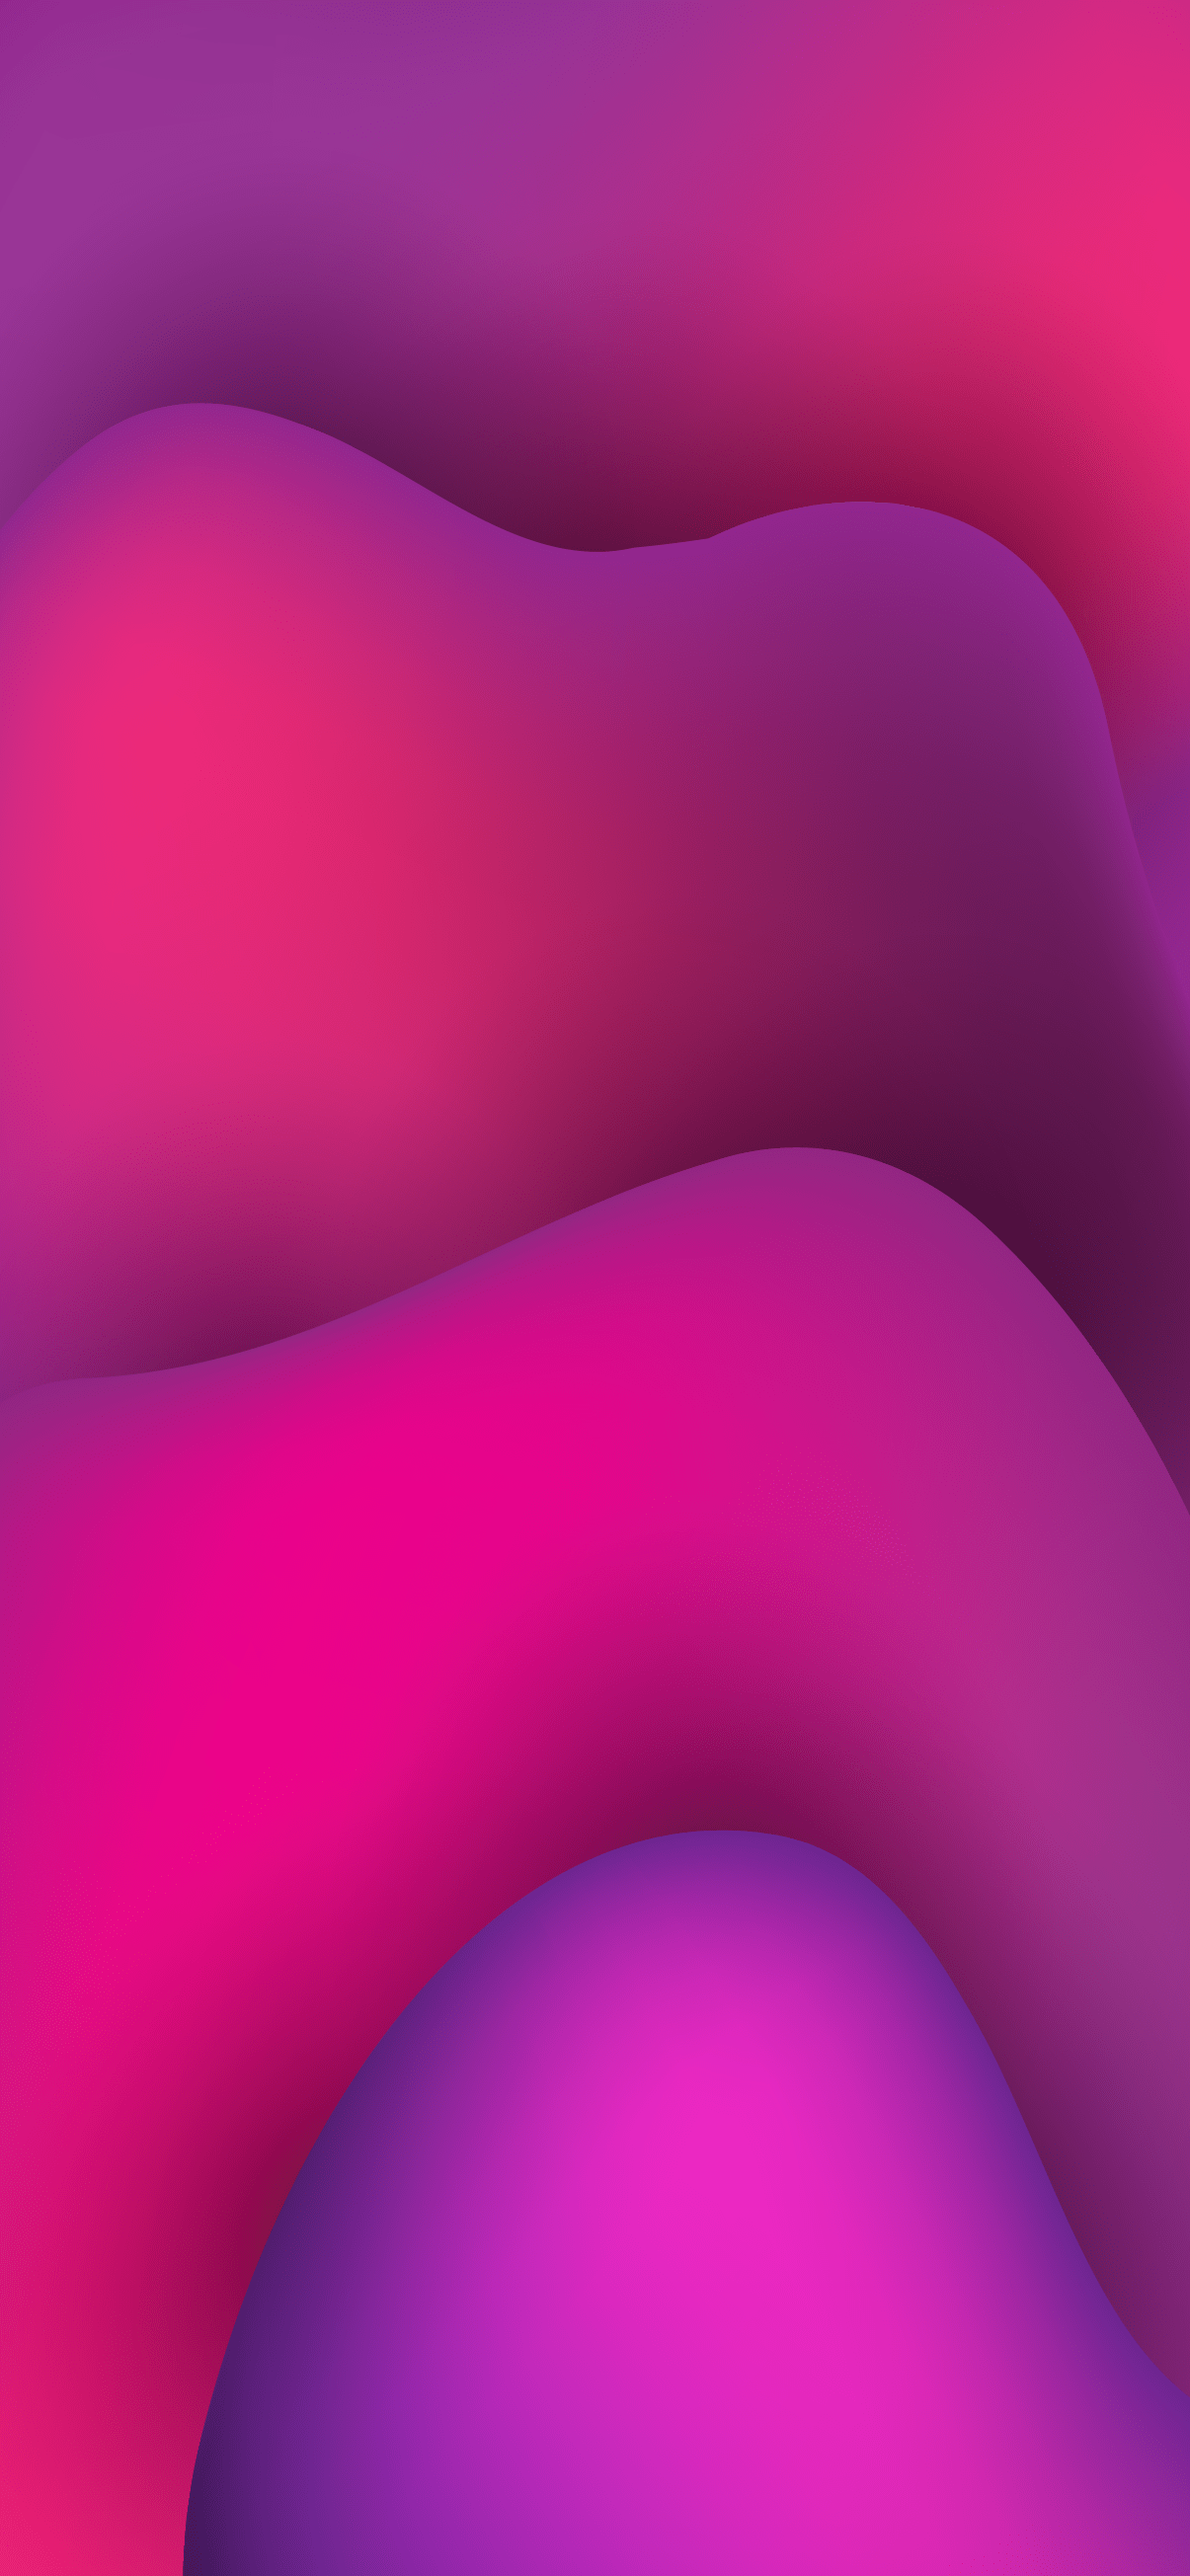 An abstract purple and pink background - Abstract